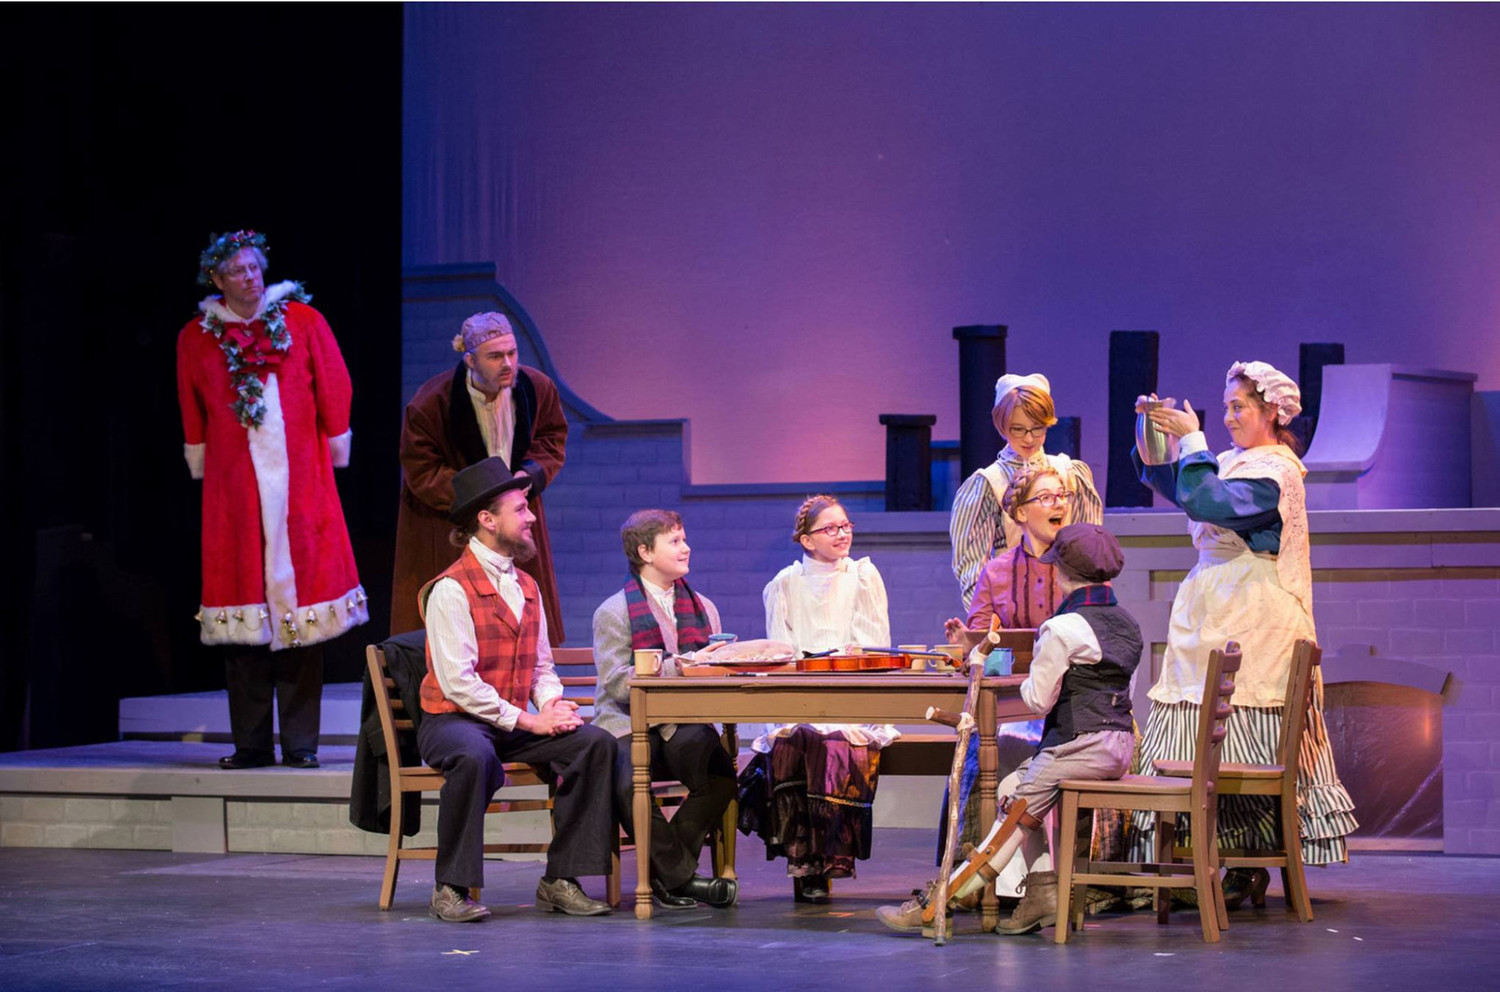 Review: Nothing “Bah, Humbug!” about SECT's A CHRISTMAS CAROL 